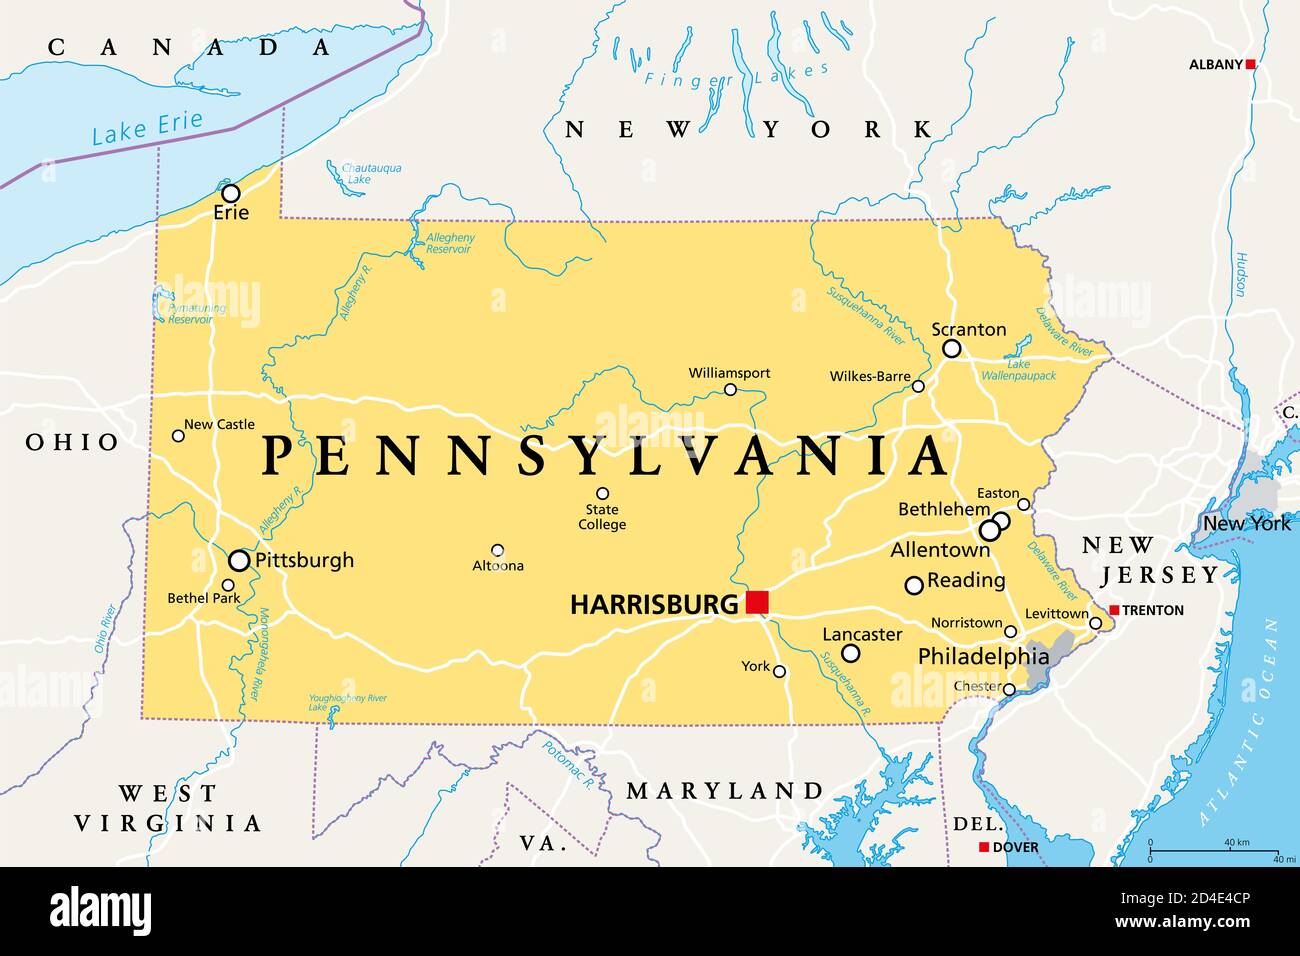 Pennsylvania, PA, political map. Officially the Commonwealth of Pennsylvania. State in the northeastern United States of America. Capital Harrisburg. Stock Photo